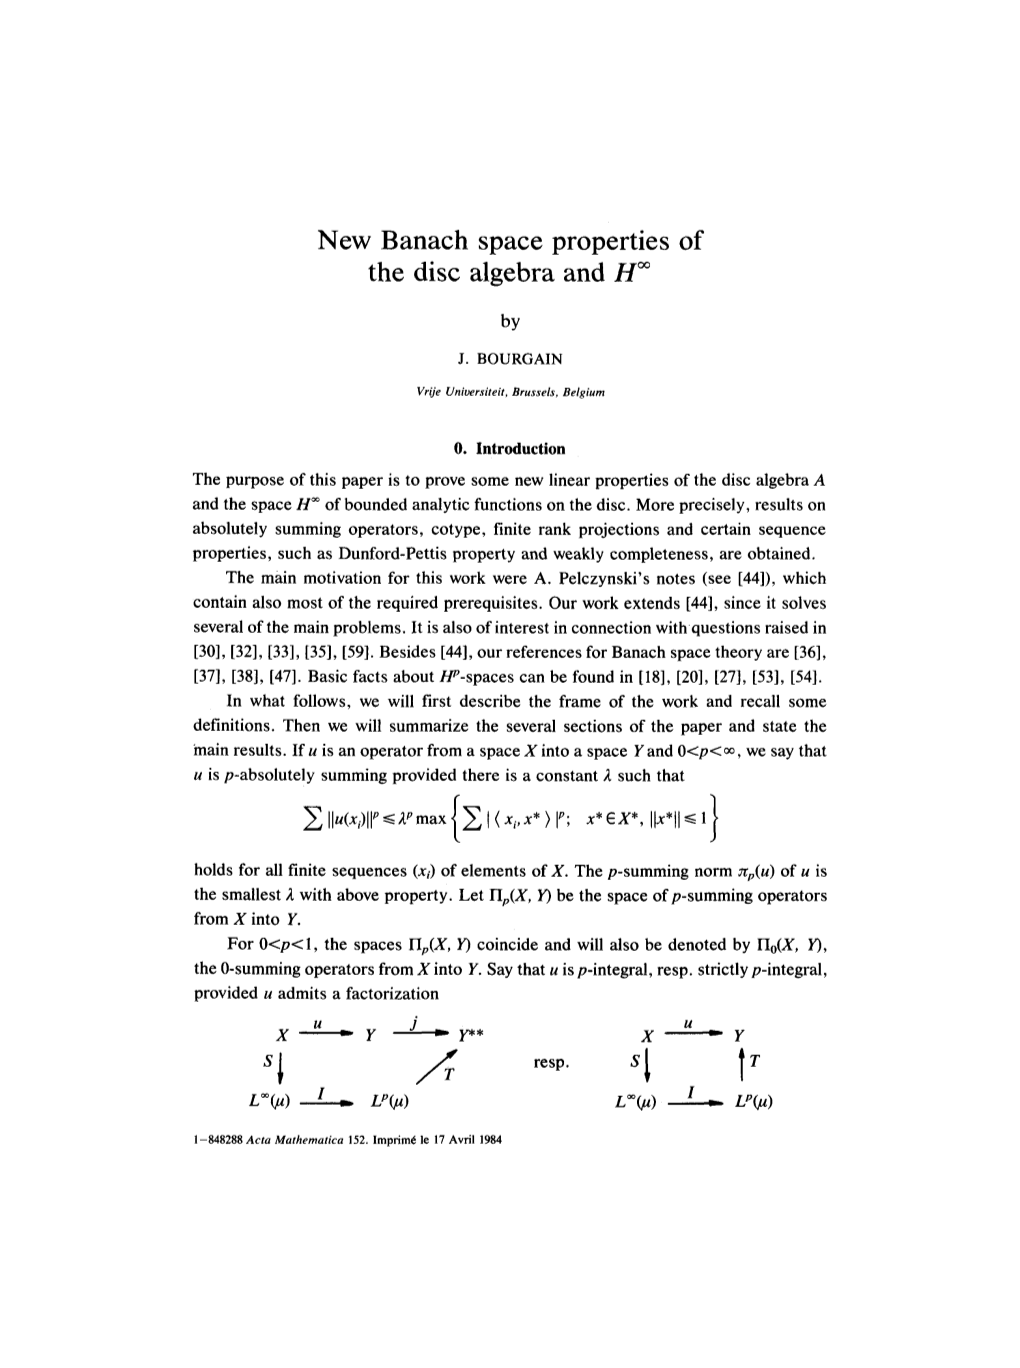 New Banach Space Properties of the Disc Algebra and &lt;Emphasis Type